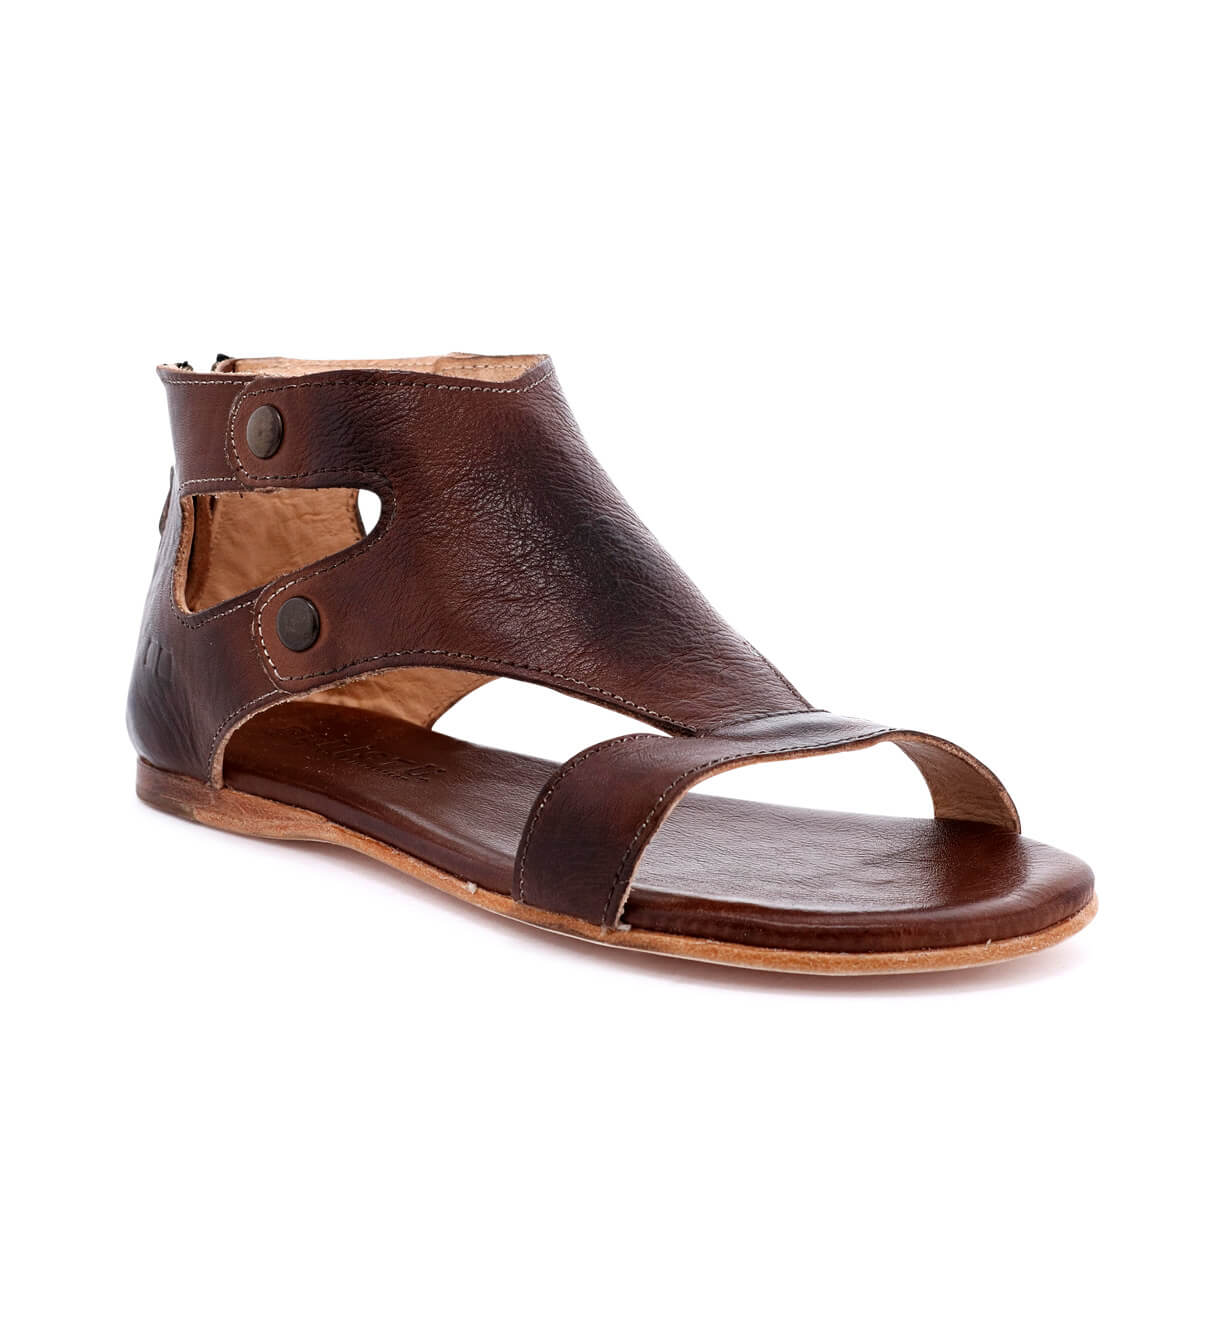 A women's brown Soto sandal with straps and buckles by Bed Stu.